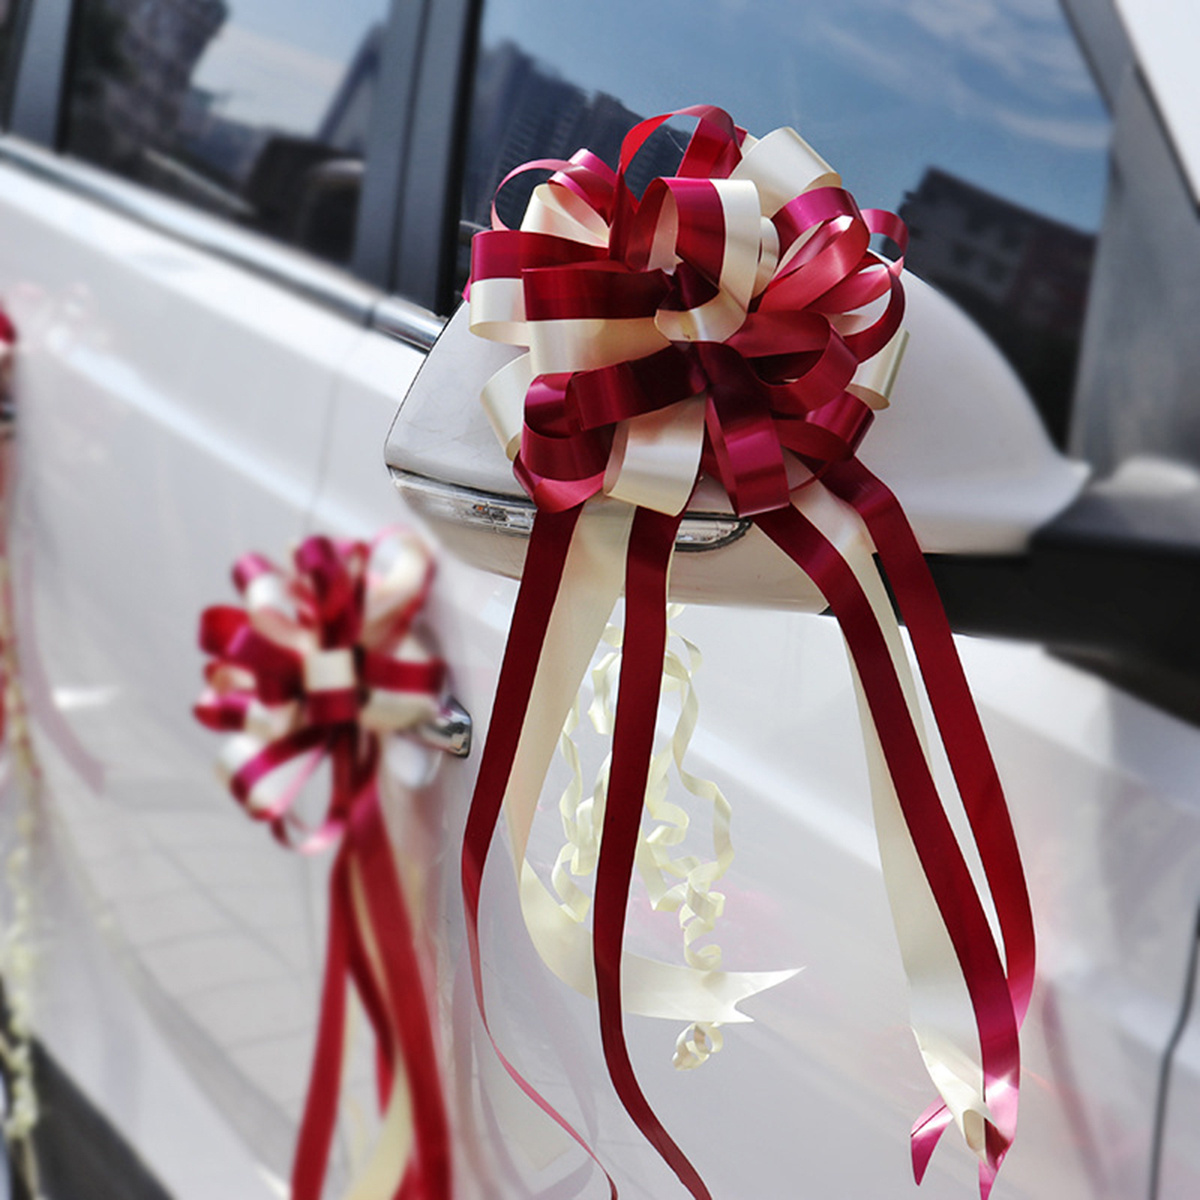 White Wedding Car Ribbon Pull Bows Knot Gift Wrap Wedding Car Decor  Birthday Party Supplies Pew Chairs DIY Home Decoration - AliExpress